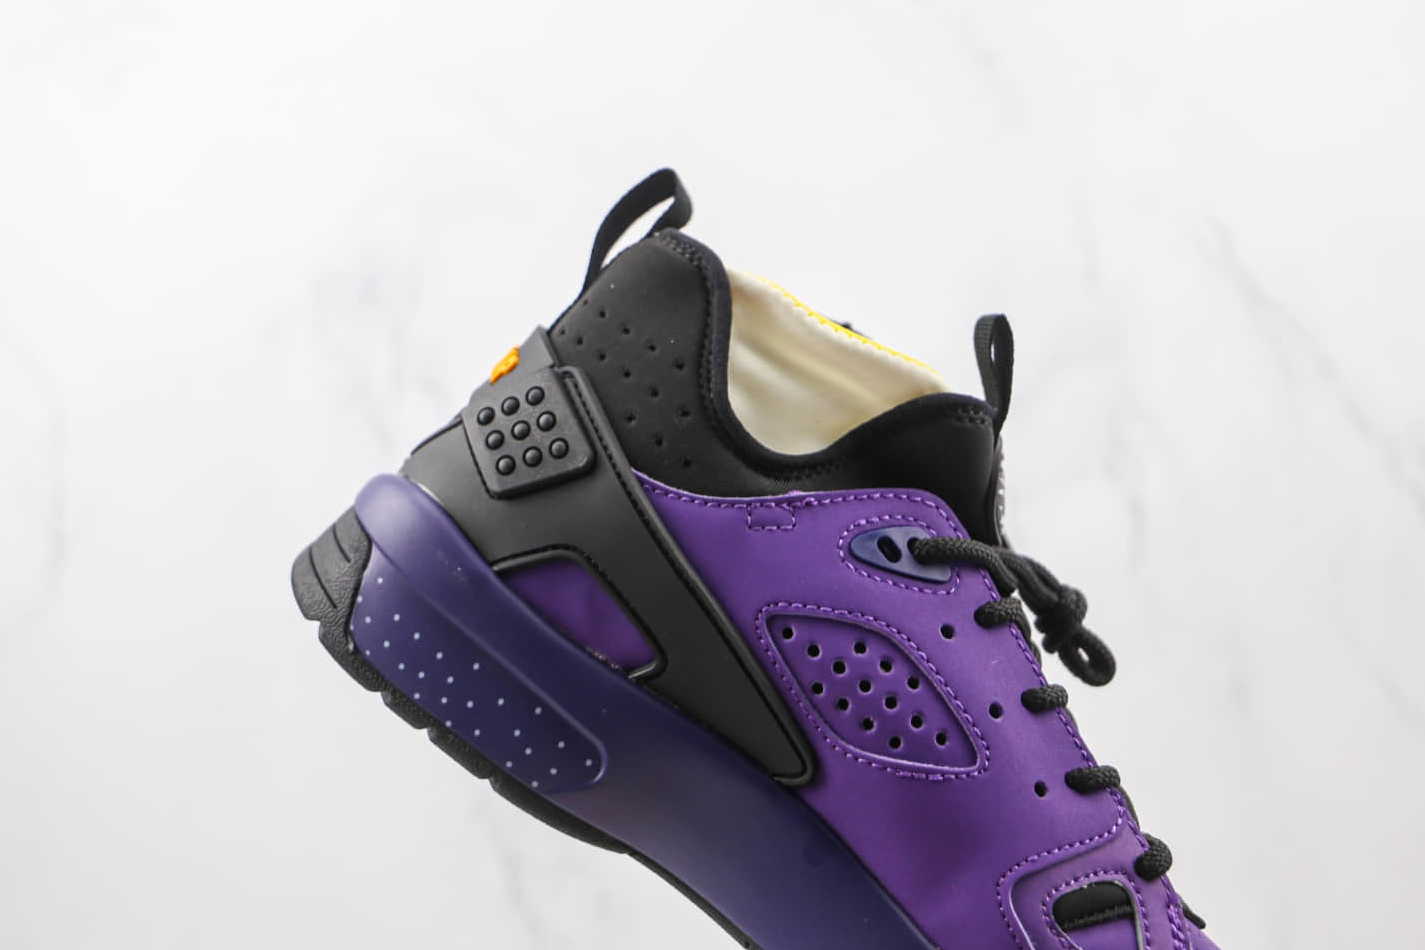 Nike ACG Air Mowabb OG 'Gravity Purple' 2021 DC9554-500 - Buy Now at Competitive Prices